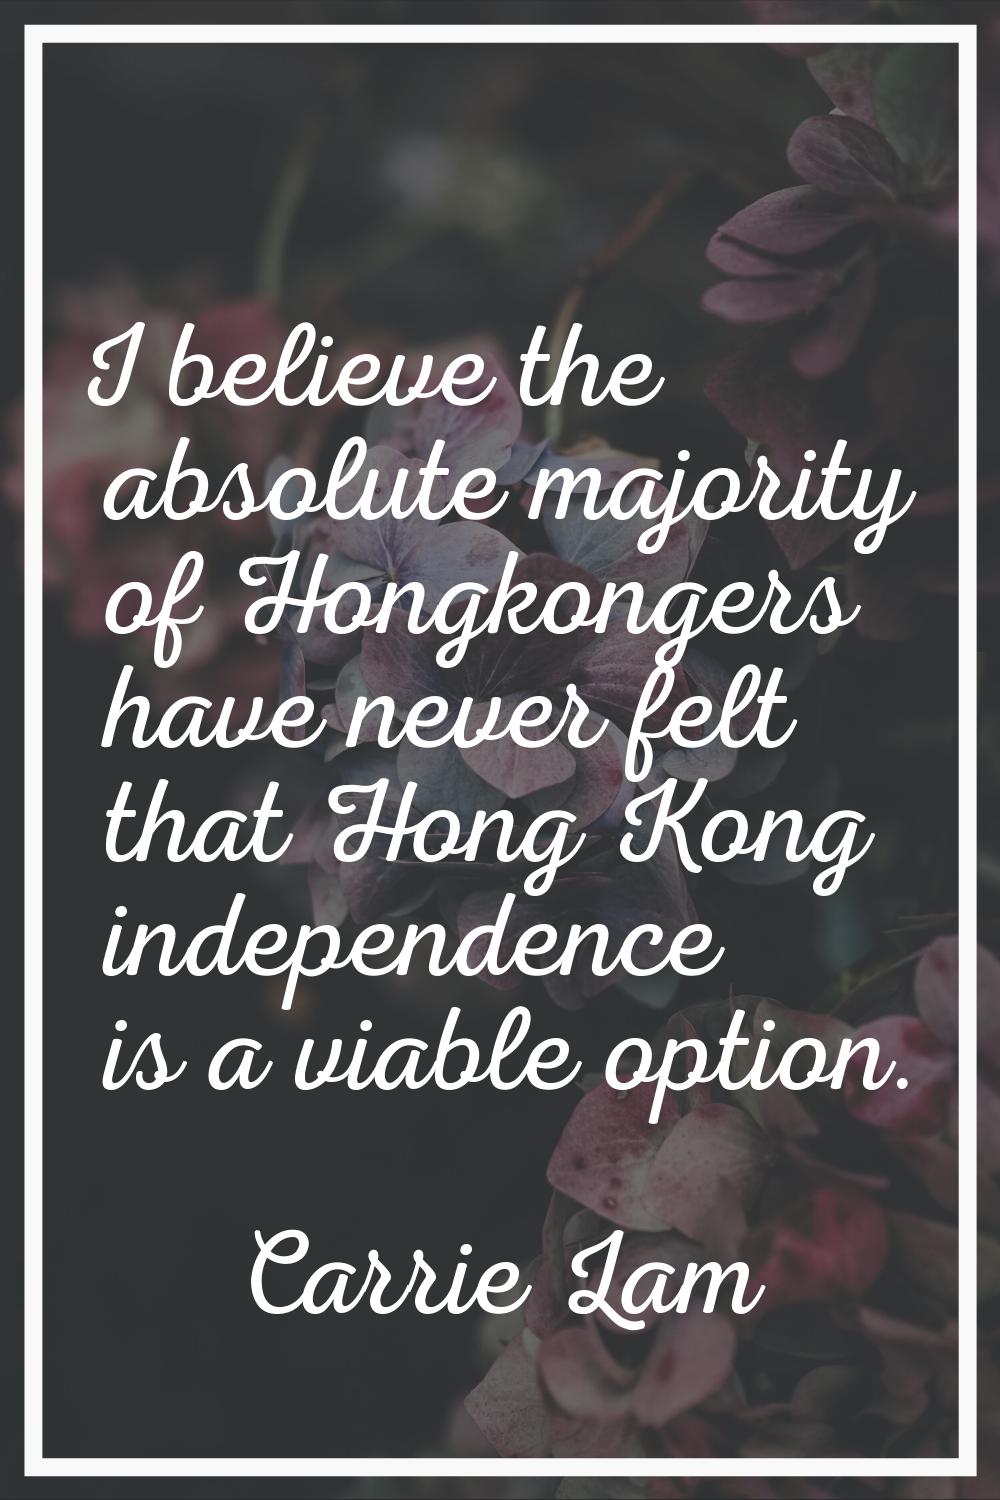 I believe the absolute majority of Hongkongers have never felt that Hong Kong independence is a via